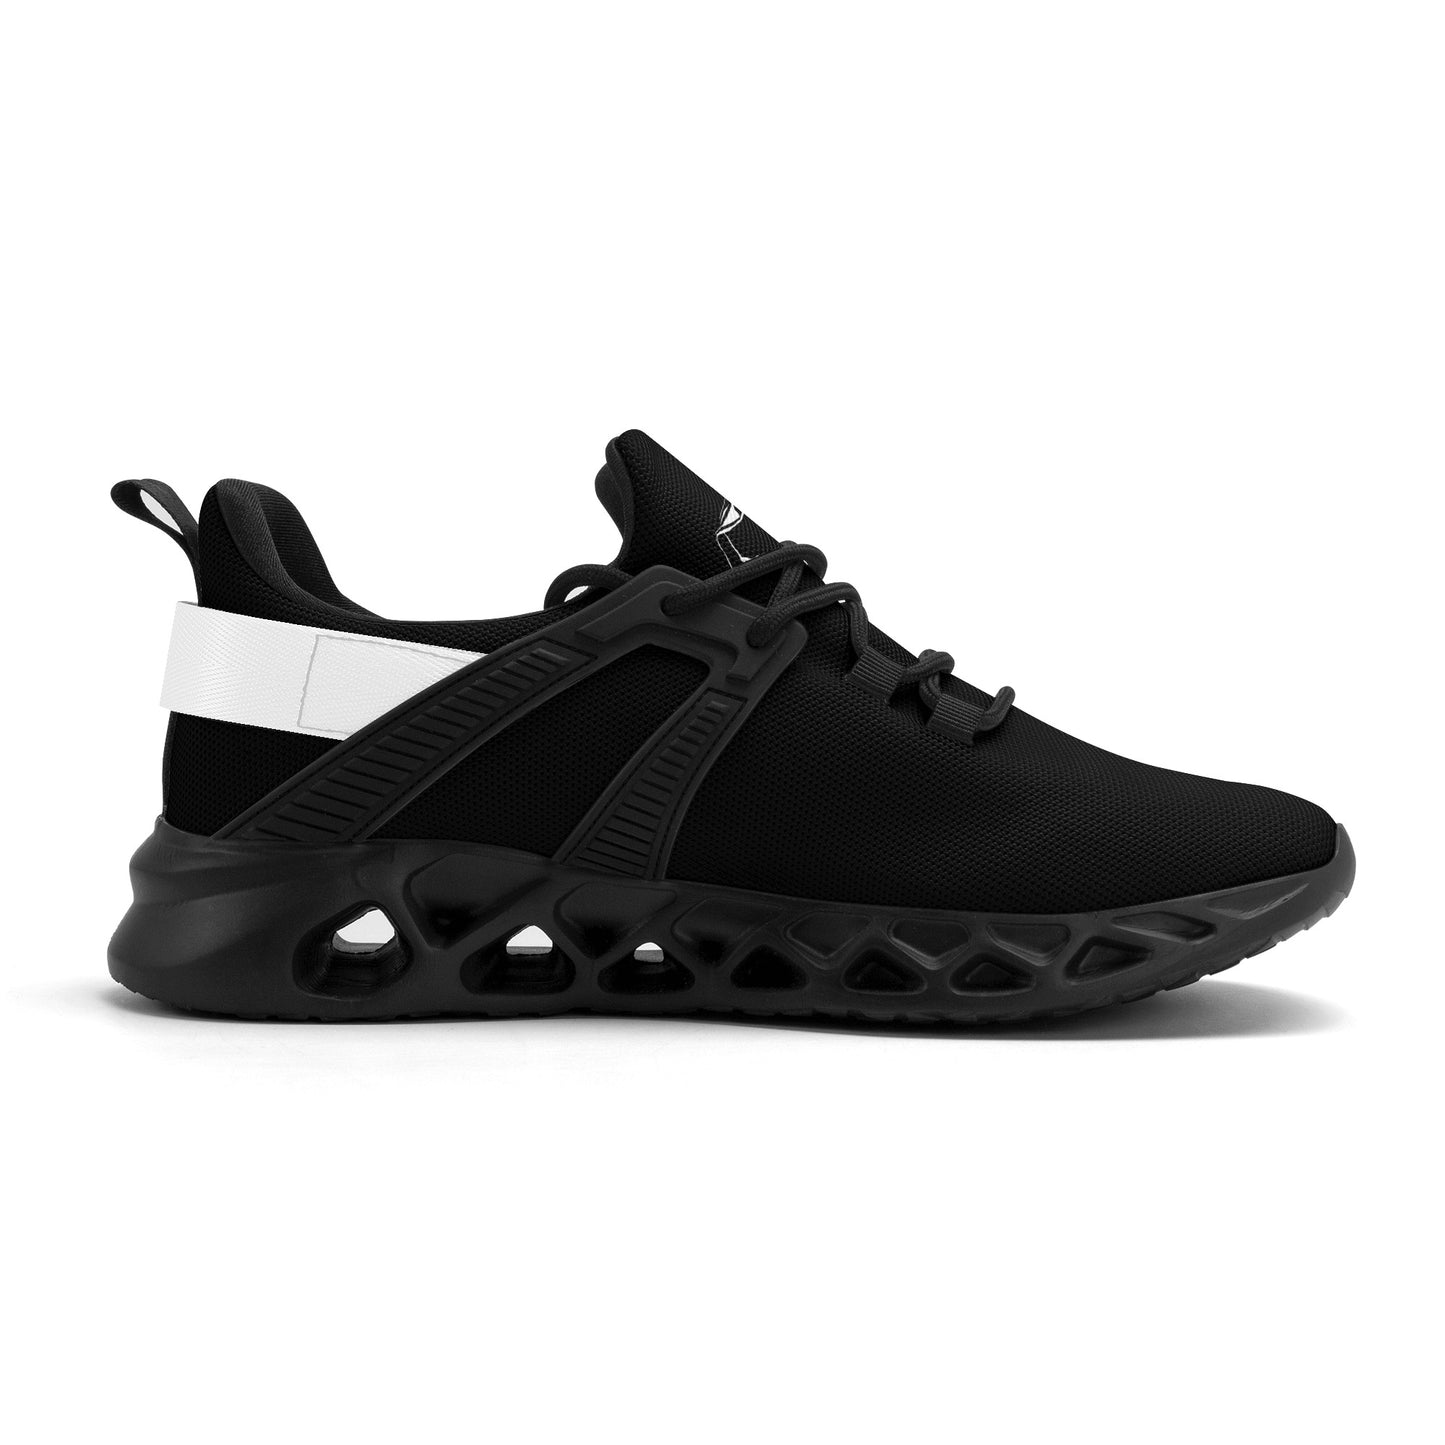 Black Insect Famili Praying Queen Women's New Elastic Sport Sneakers